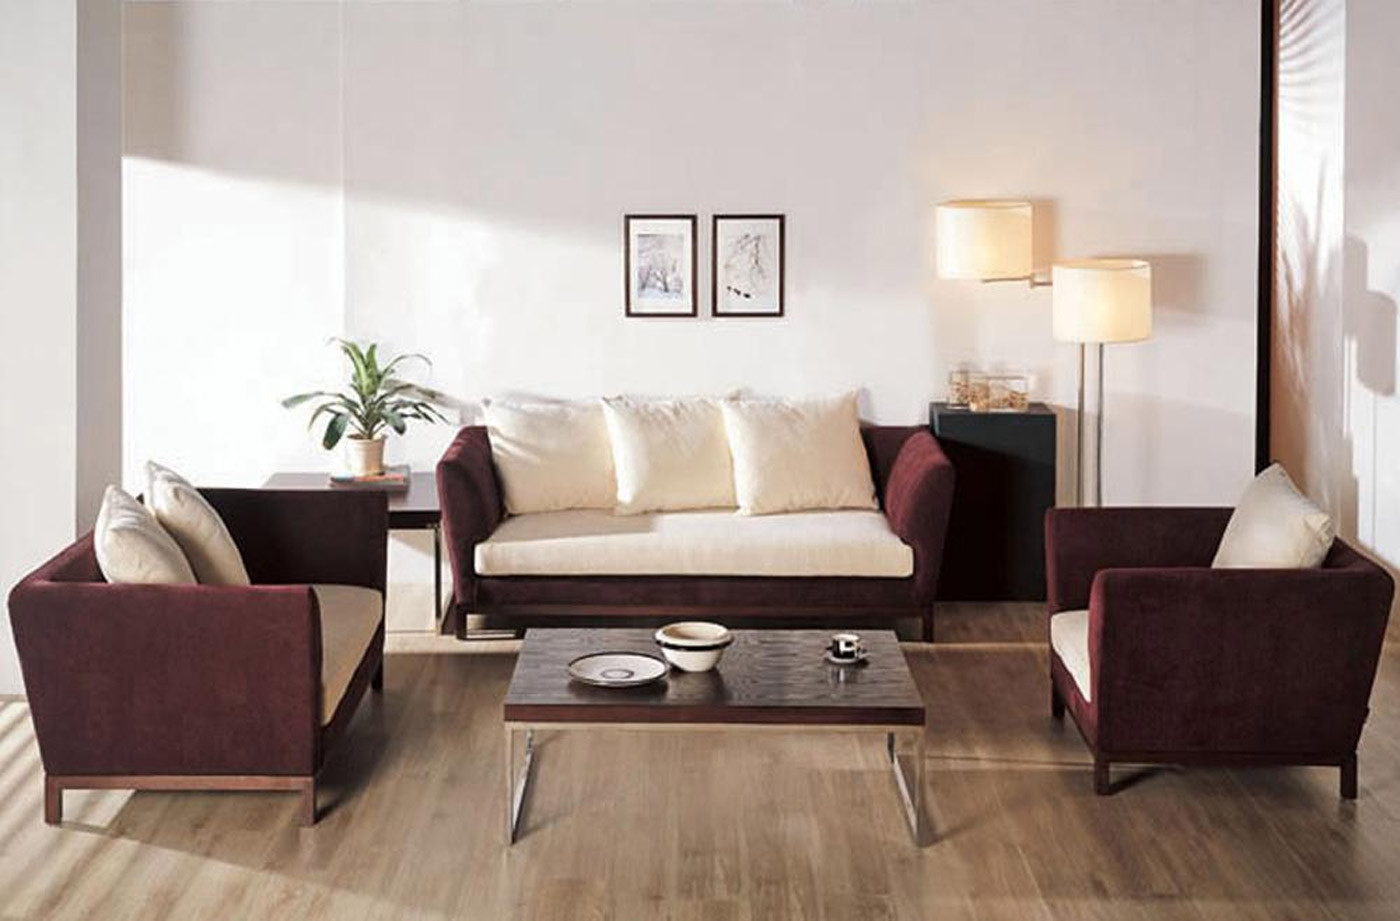 Small Living Room Sets
 Find Suitable Living Room Furniture With Your Style